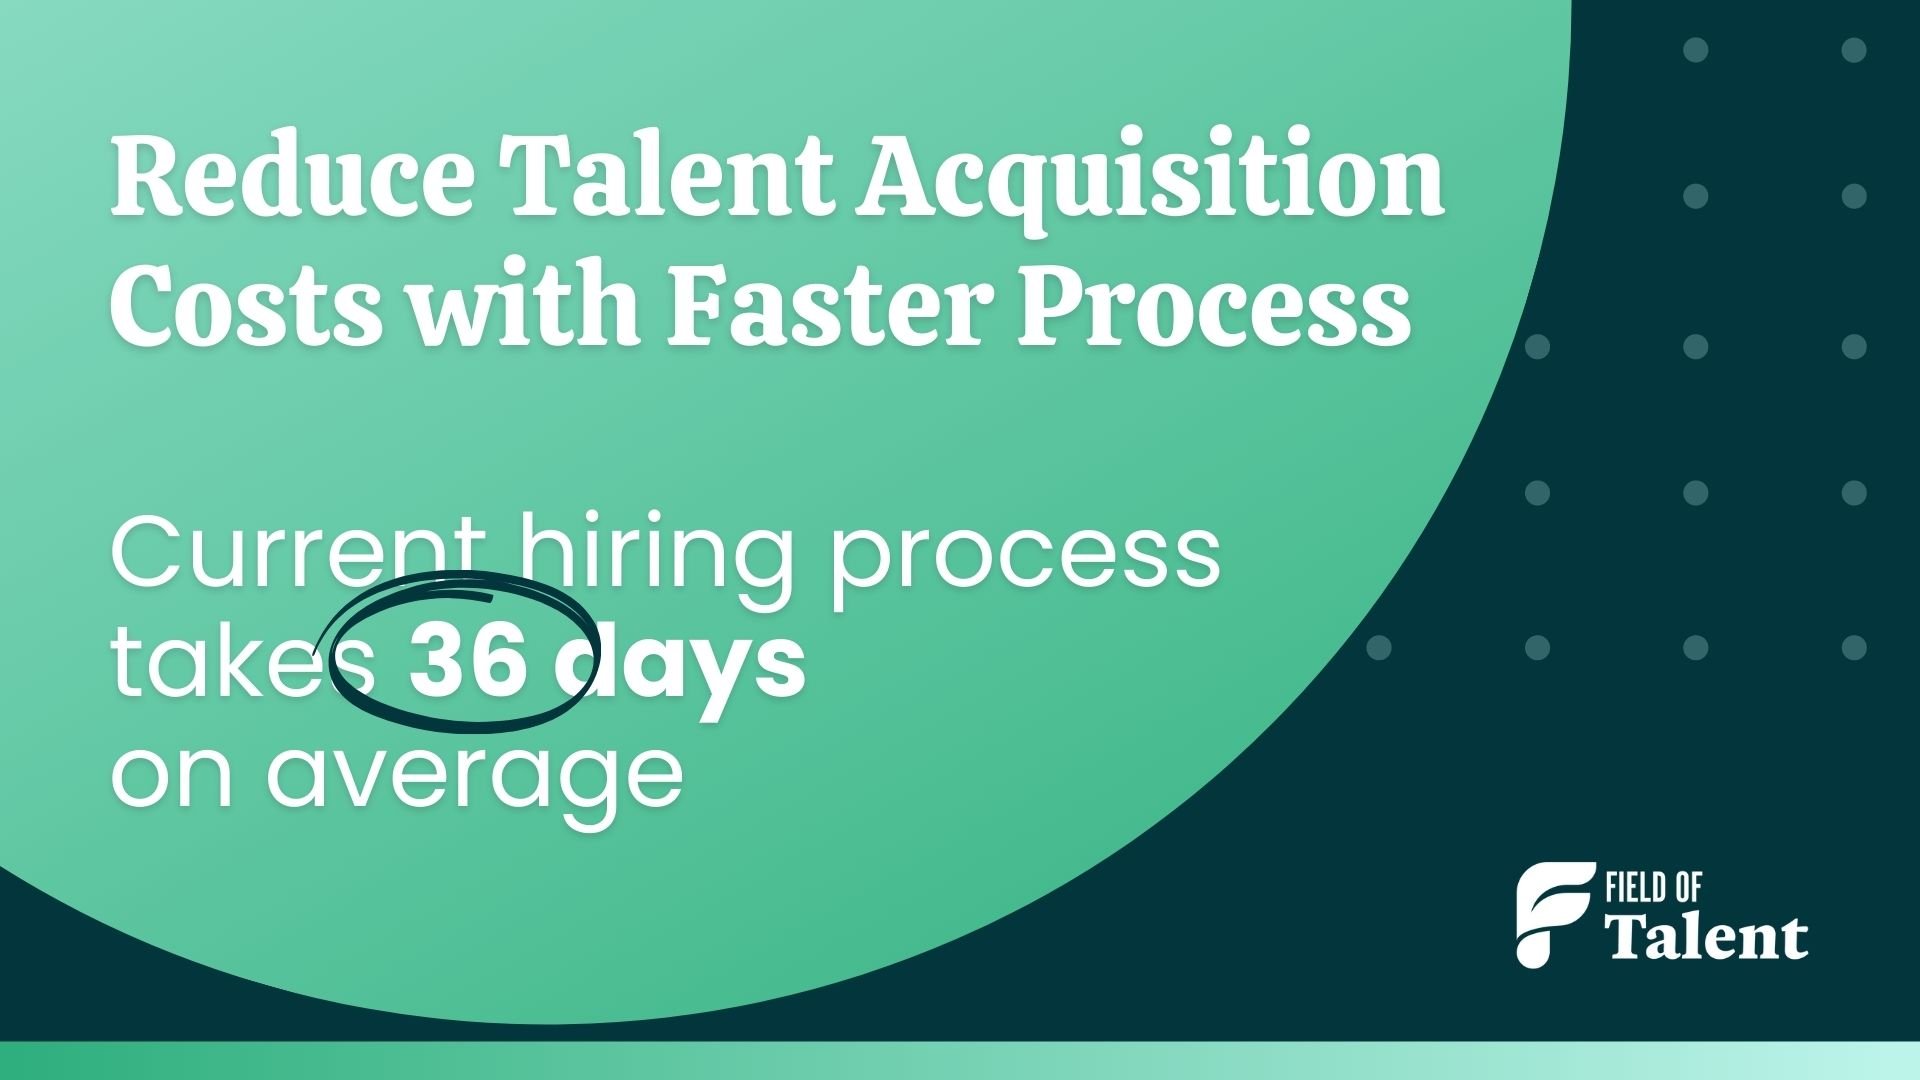 Current hiring process takes 36 days on average